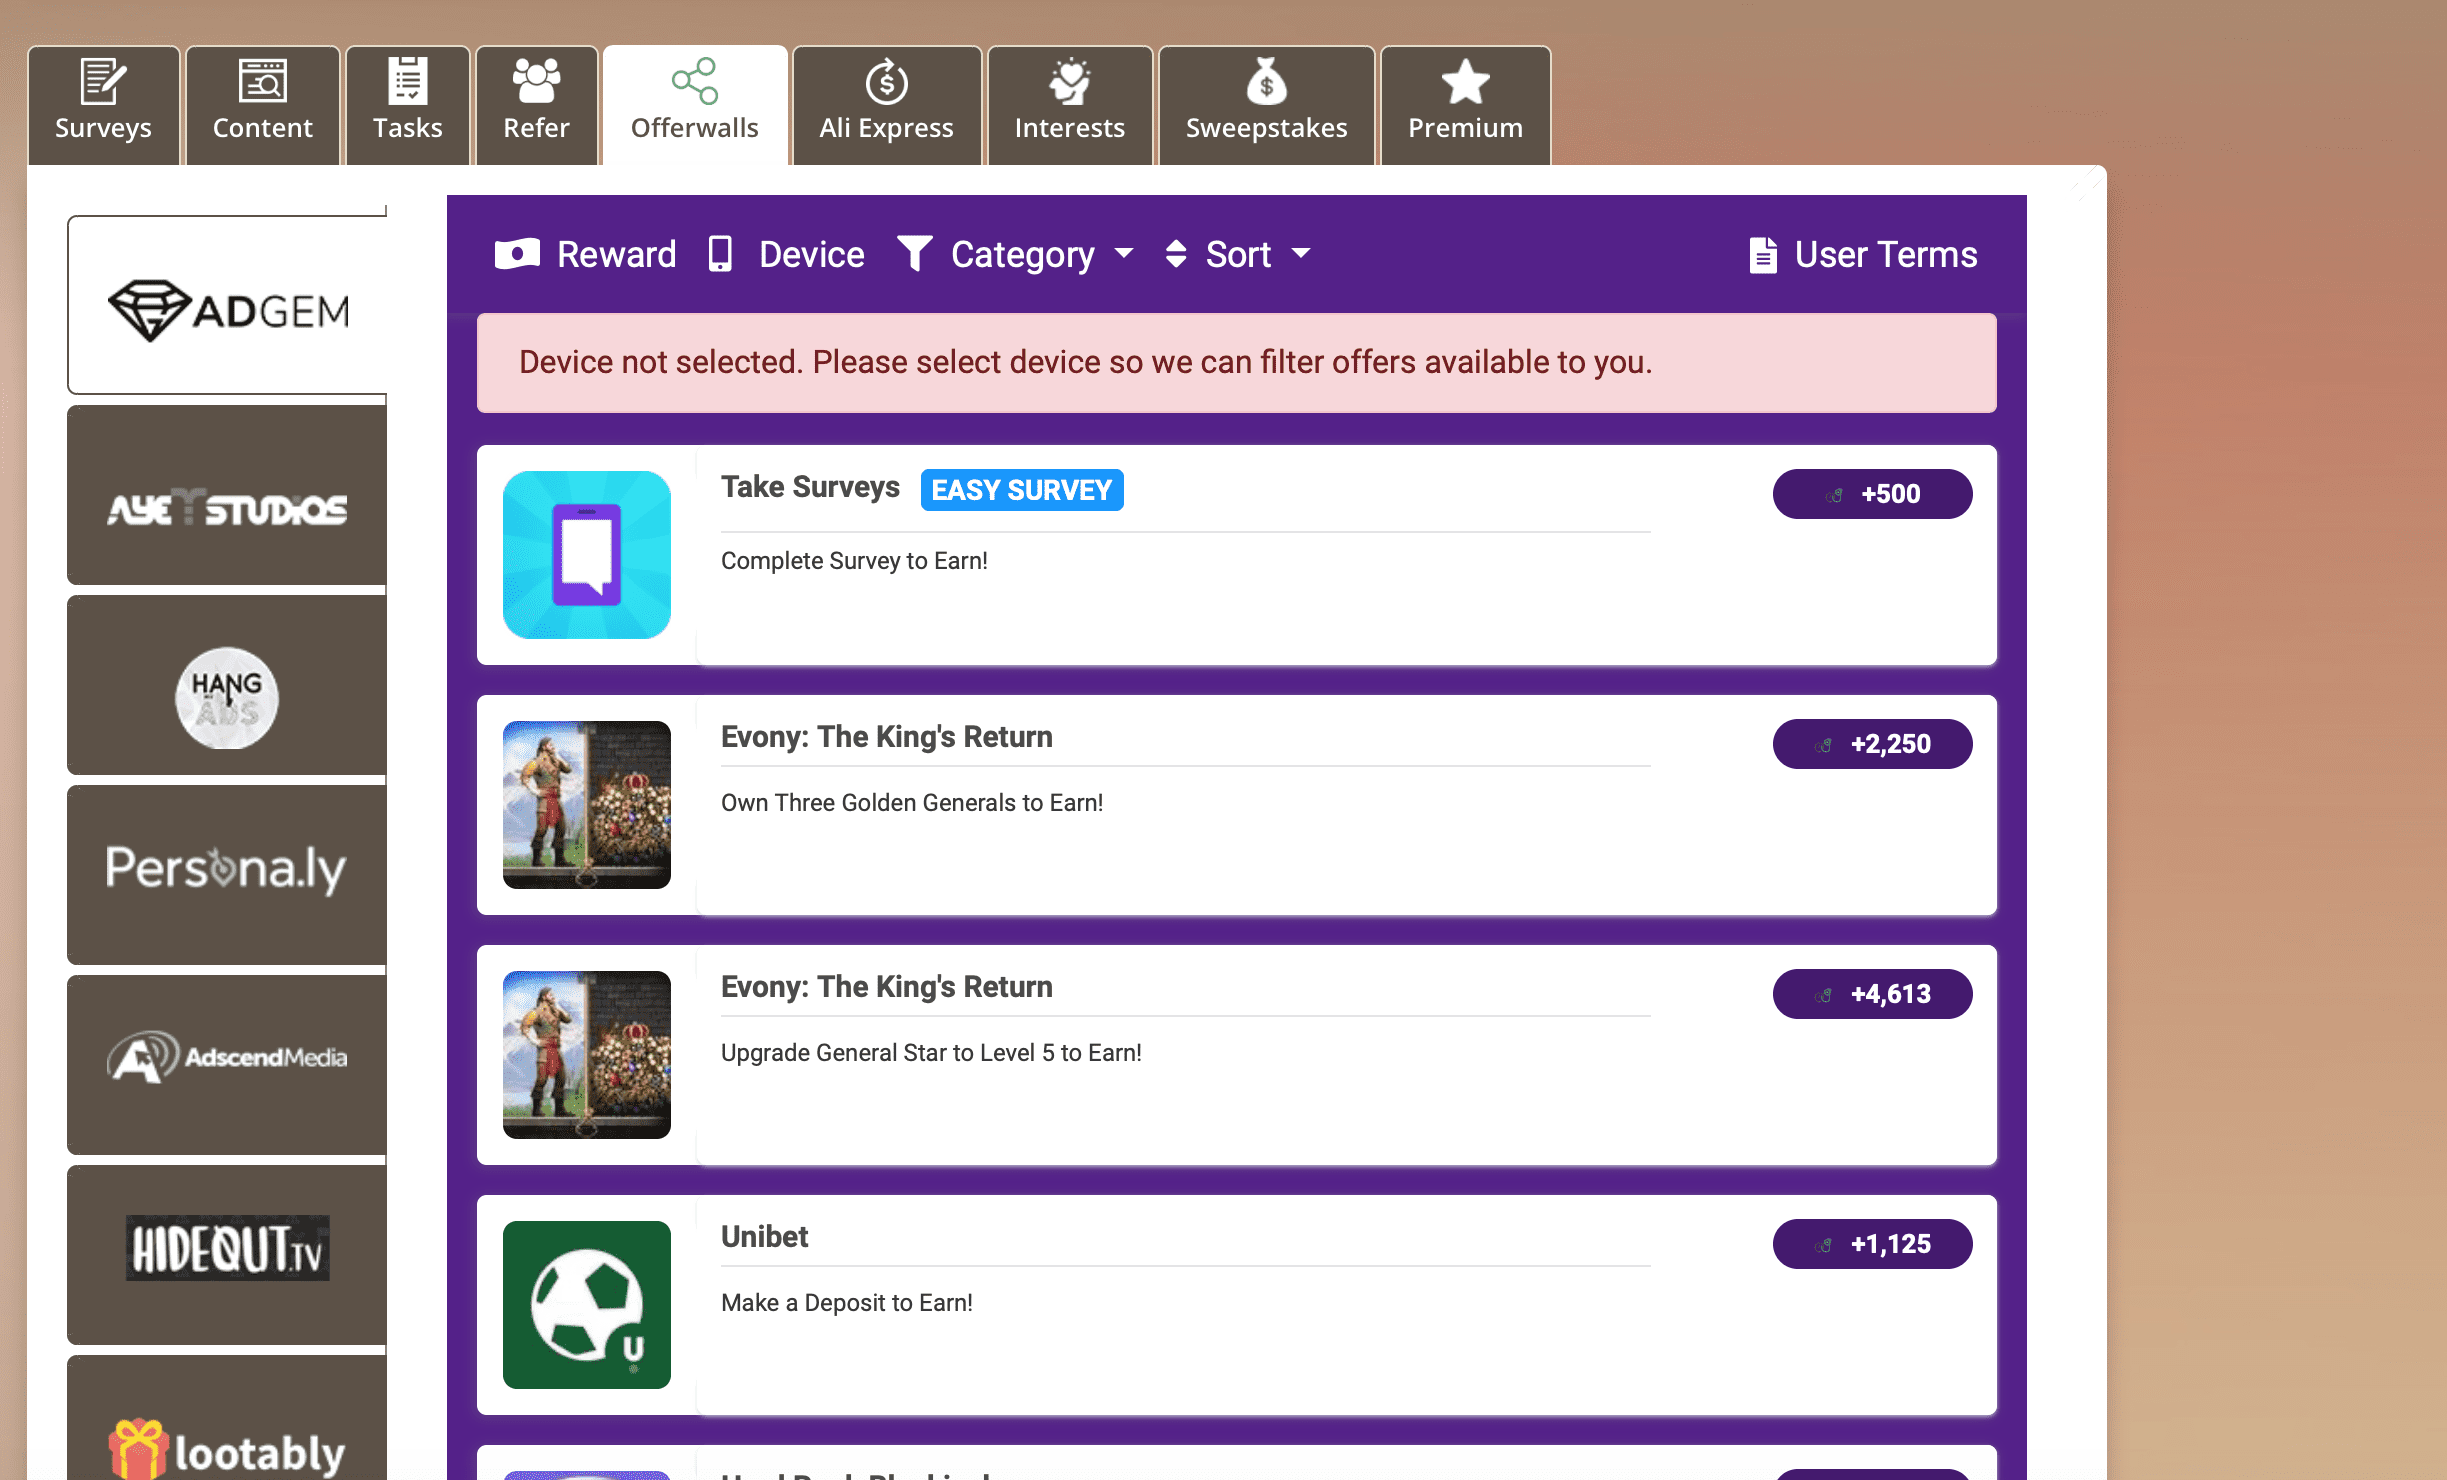 Offerwall tab on Timebucks showing 1st page of tasks for AdGem: Take surveys to earn, Evony The kings return: Own three golden generals to earn, Unibet: make a deposit to earn.